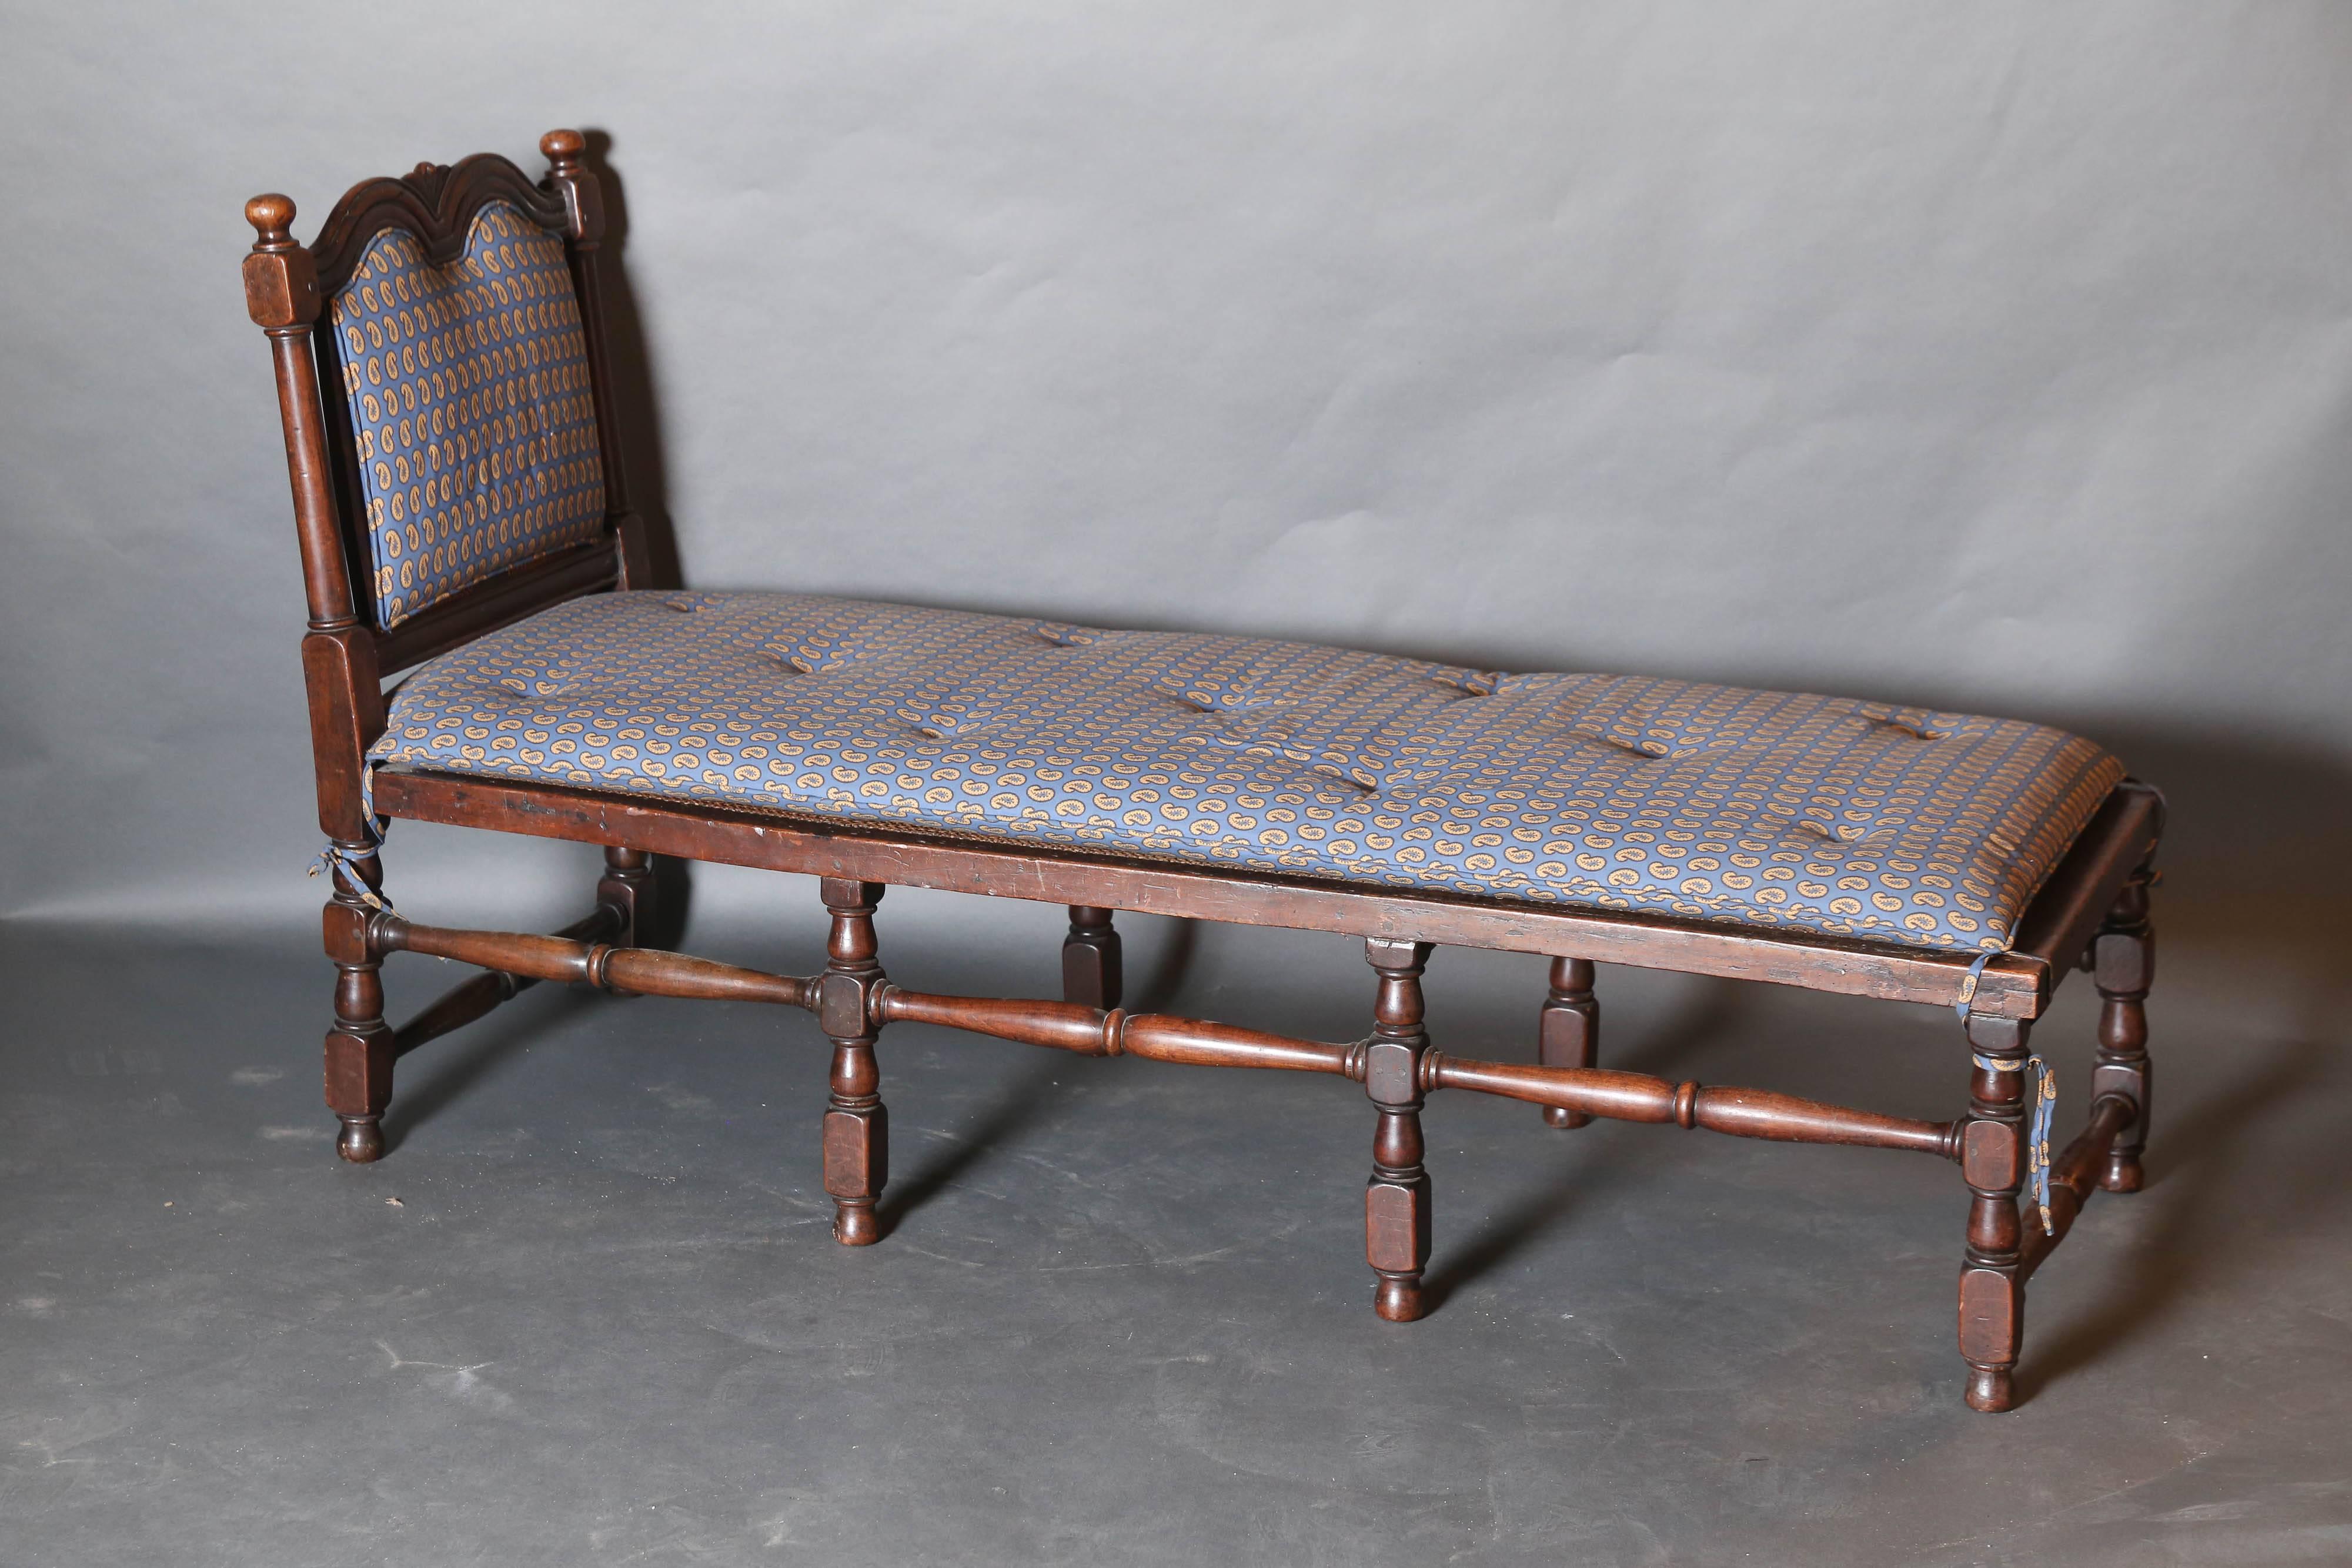 Charles II carved walnut chaise with cane seat an upholstered back, plus loose cushion. A Royal Crown is featured on headboard with a pair of finials.

Legs and stretcher are all turned.